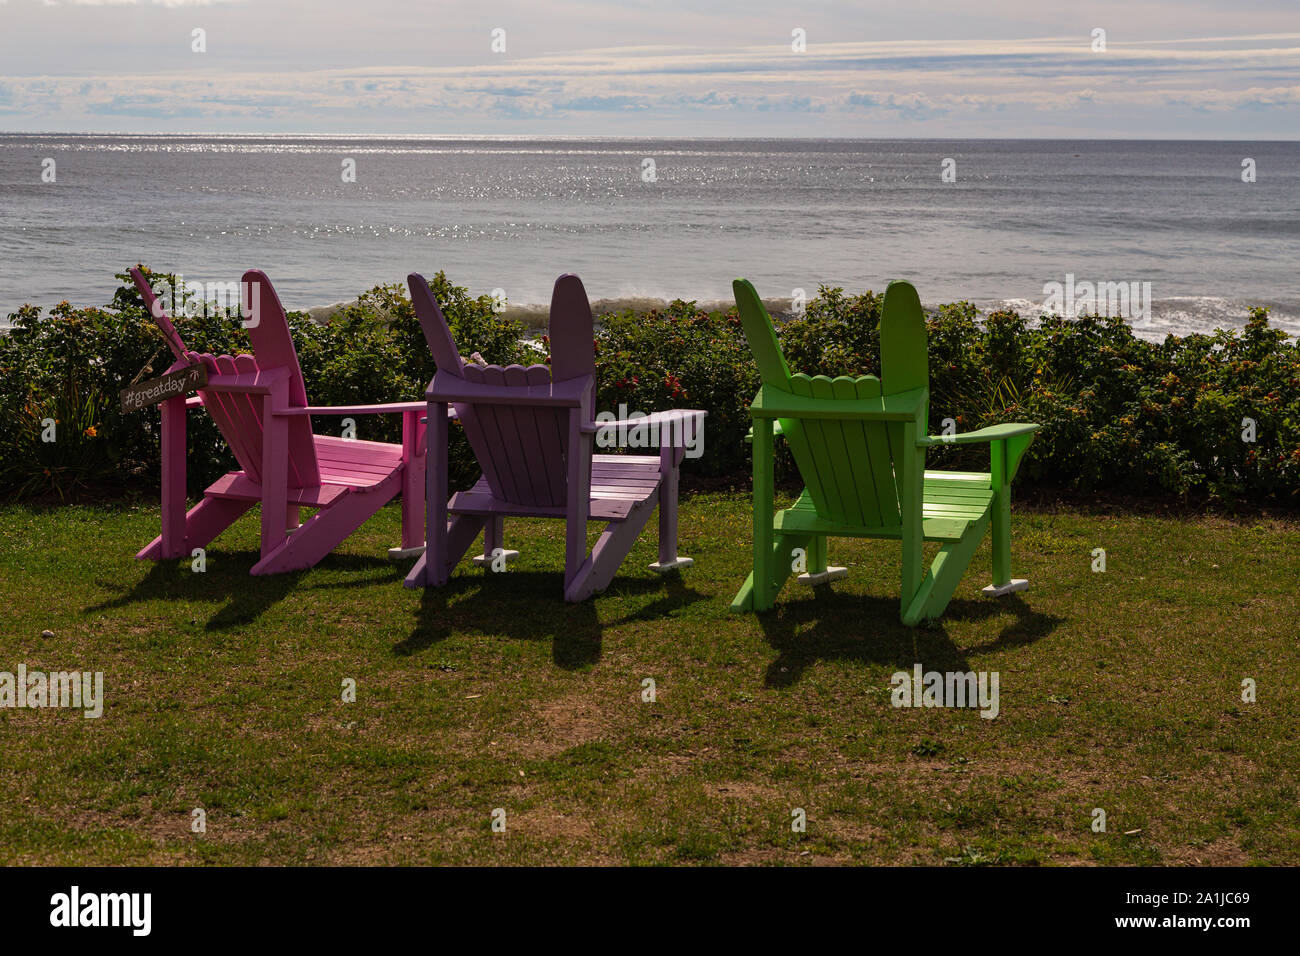 Three empty, brightly coloured lawn chairs on the grass, overlooking the Atlantic Ocean at White Point Beach, Nova Scotia, Canada. Stock Photo